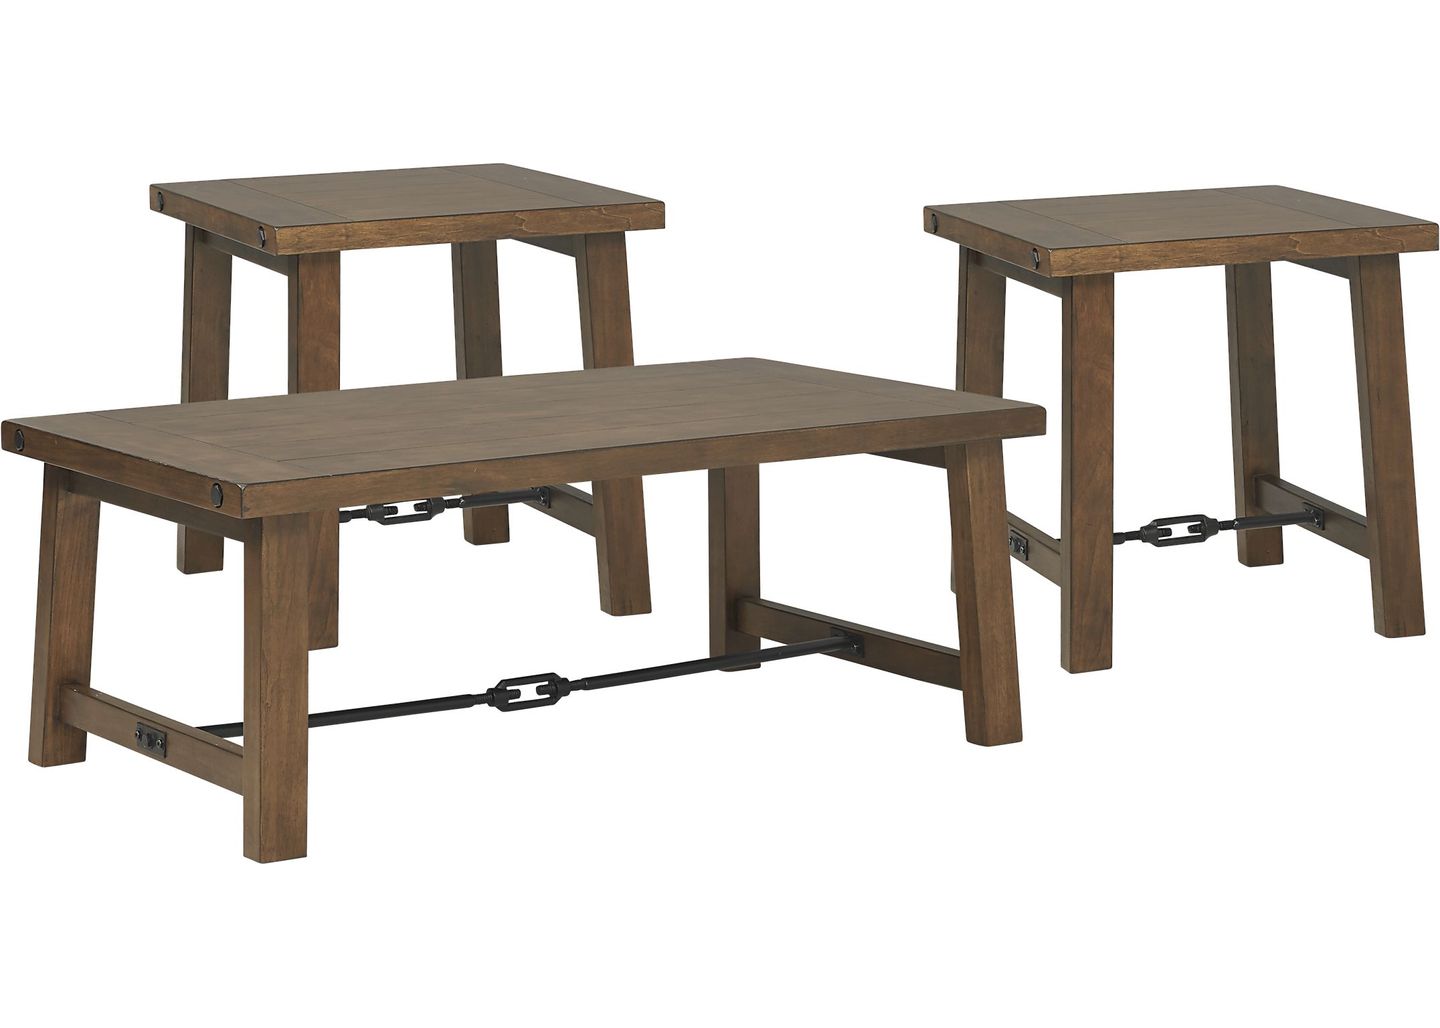 Rooms To Go South River Brown 3 Pc Cocktail Table Set